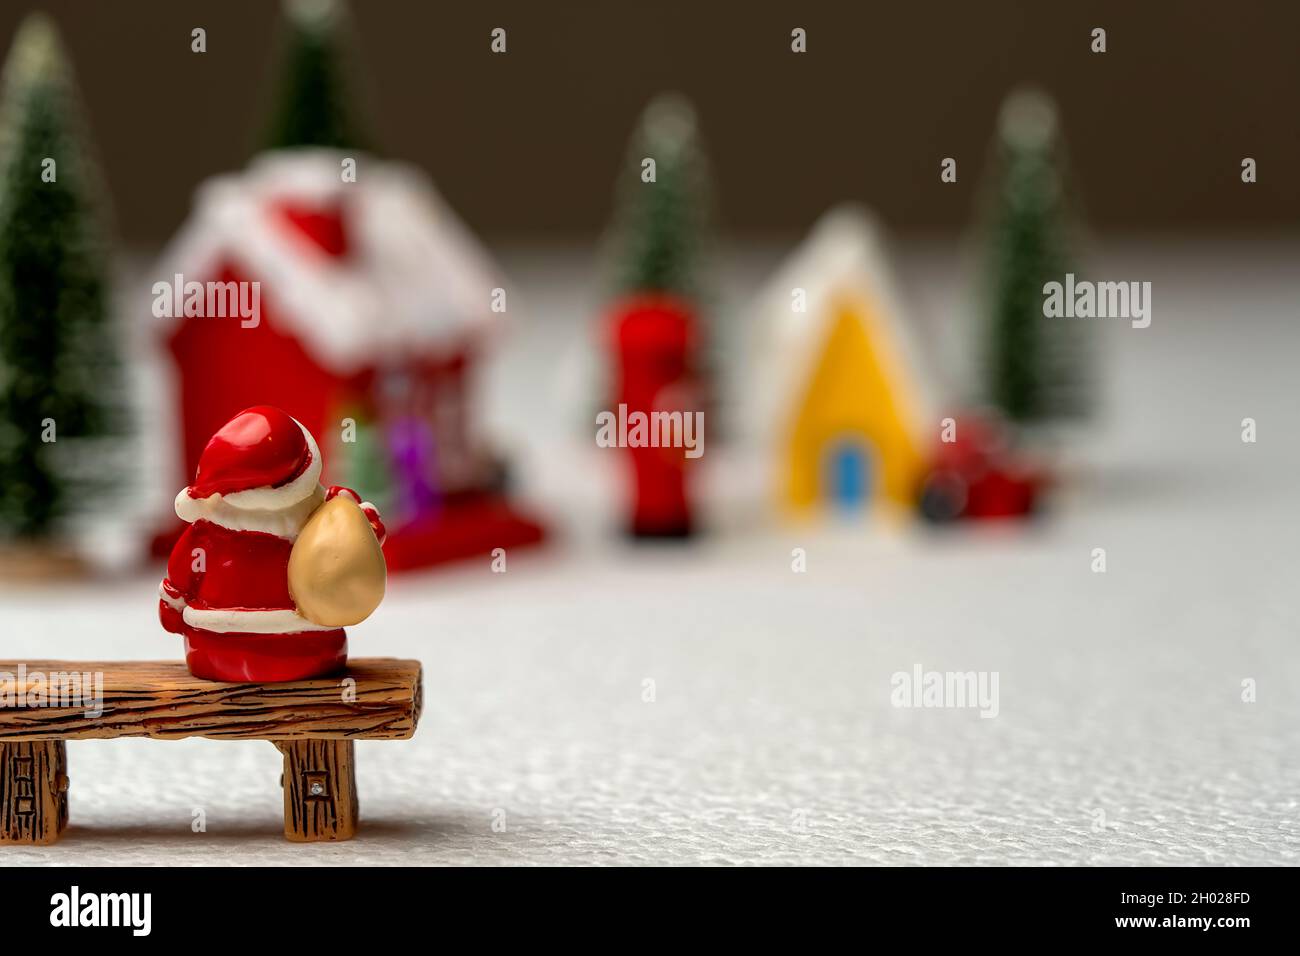 Santa Claus carrying a bag sitting on a bench. Stock Photo